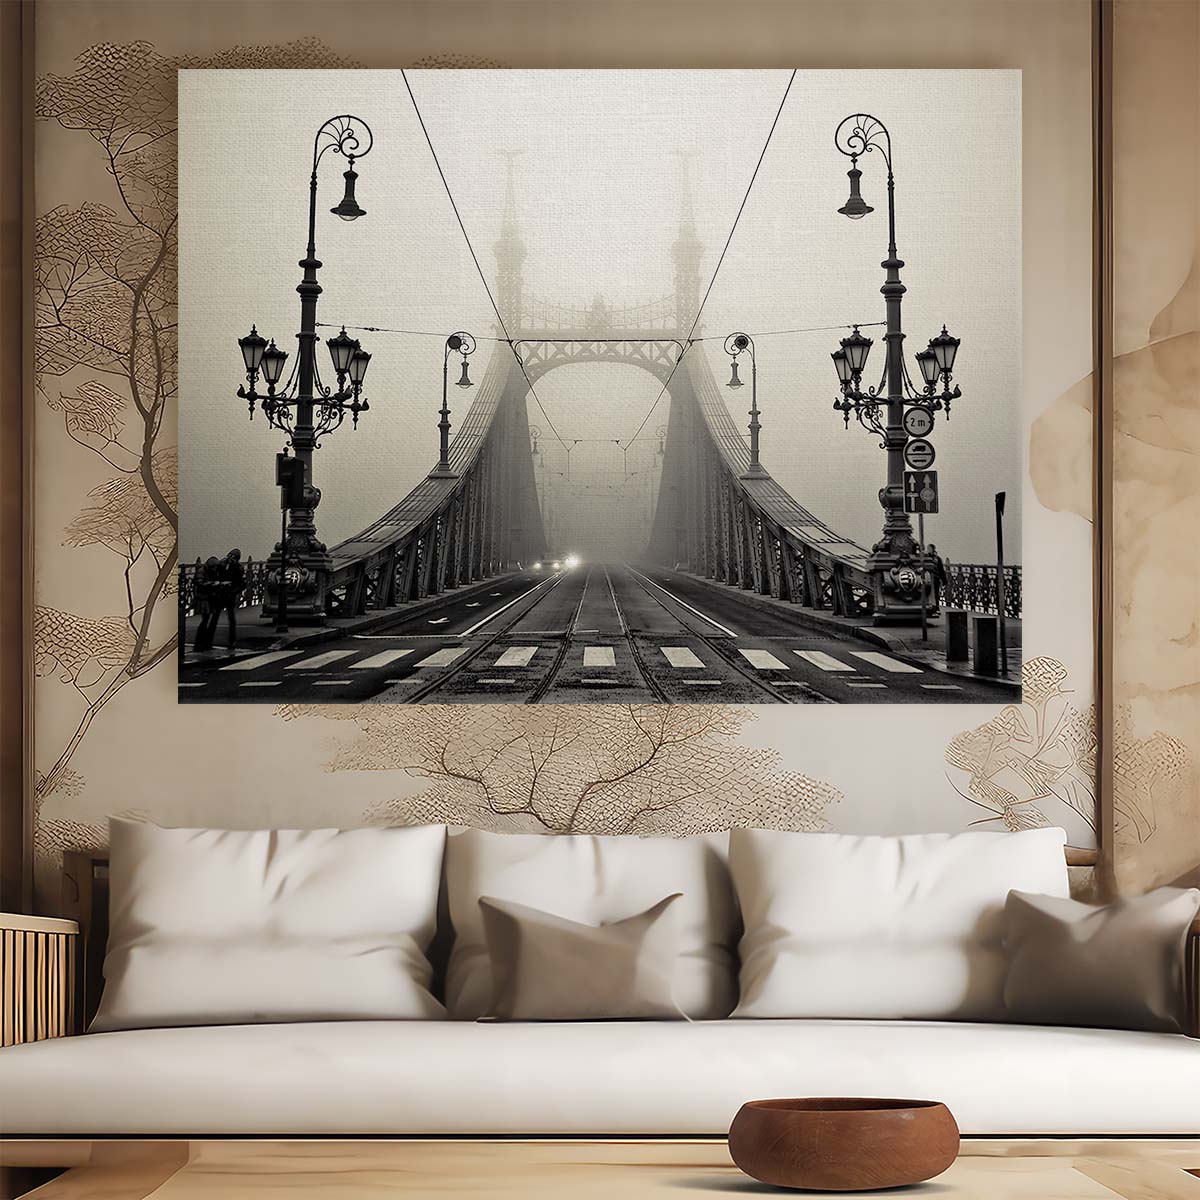 Foggy Budapest Liberty Bridge Iconic View Wall Art by Luxuriance Designs. Made in USA.